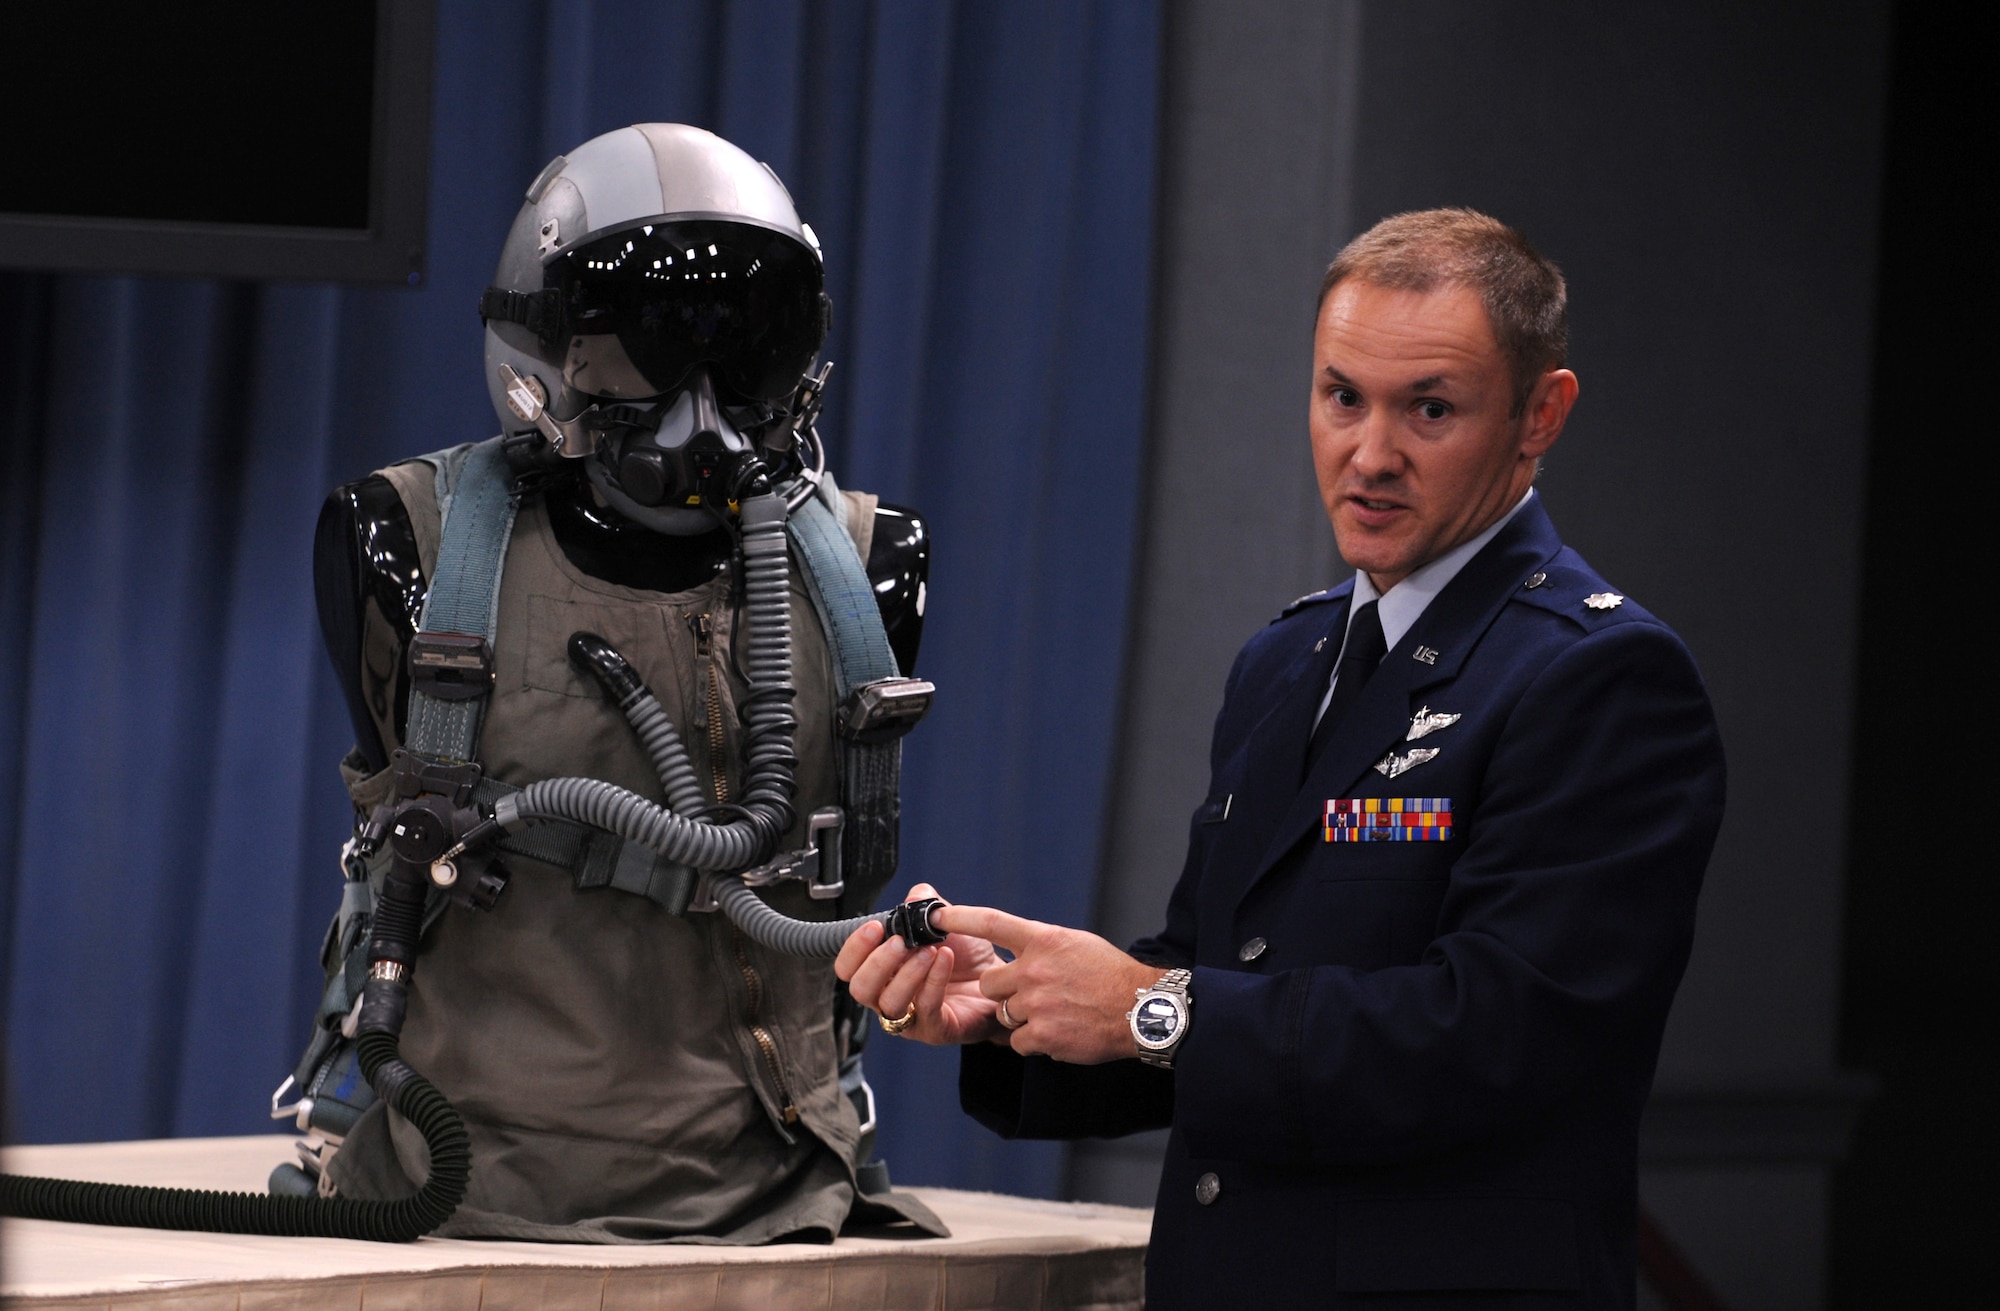 Lt. Col. Jay Flottmann explains how a valve in the upper pressure garment and the shape and size of oxygen-delivery hoses and connection points contributed to previously unexplained physiological issues during F-22 Raptor flights. He spoke during a press conference in Washington, D.C., July 31, 2012. Flottmann is a flight surgeon and 325th Fighter Wing chief of flight safety. (U.S. Air Force photo/Senior Airman Christina Brownlow)